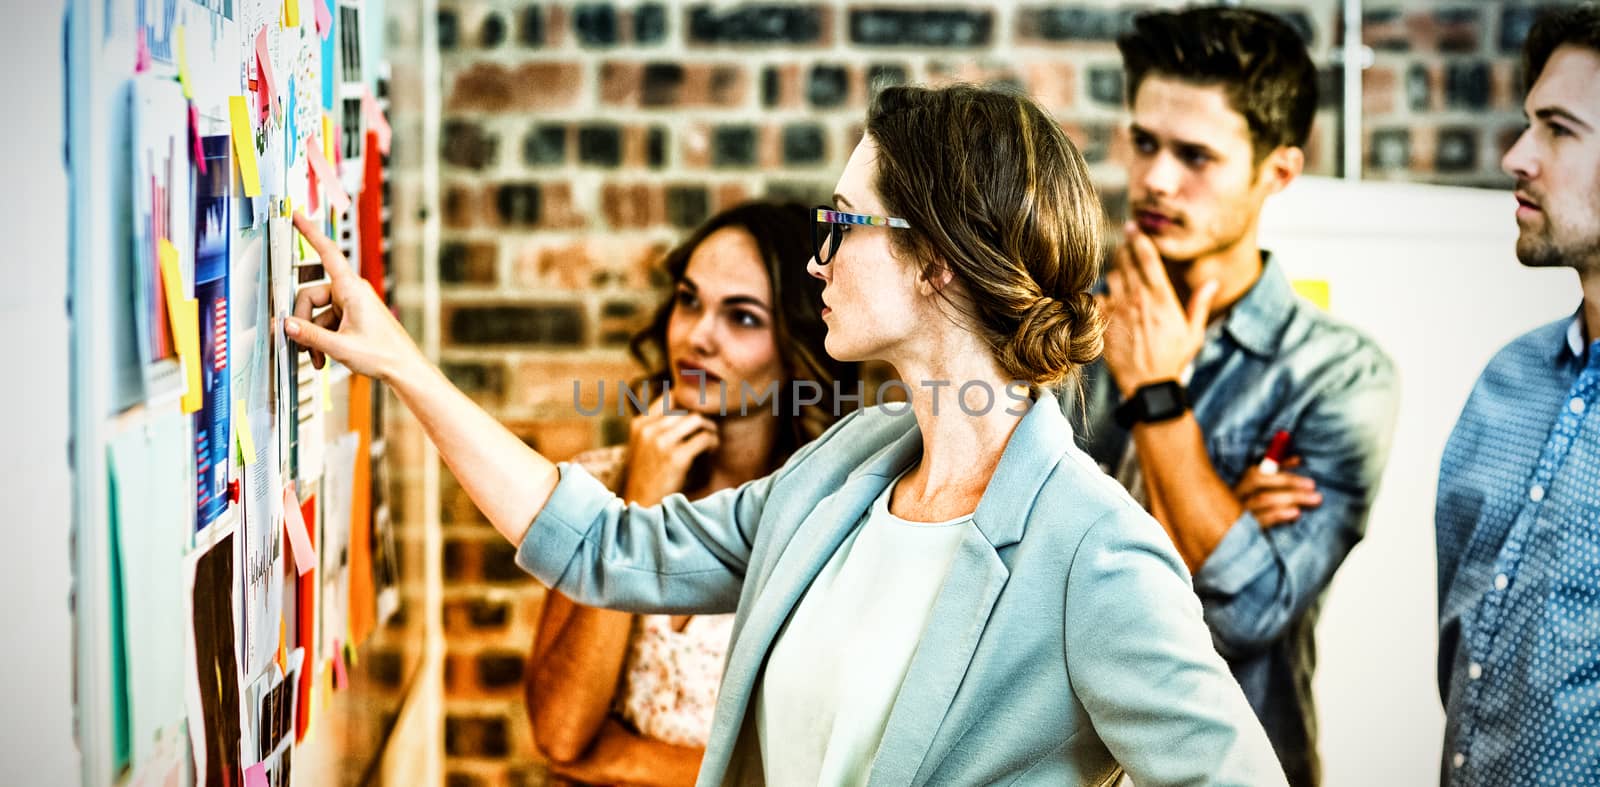 Business executives looking at sticky notes on whiteboard in office